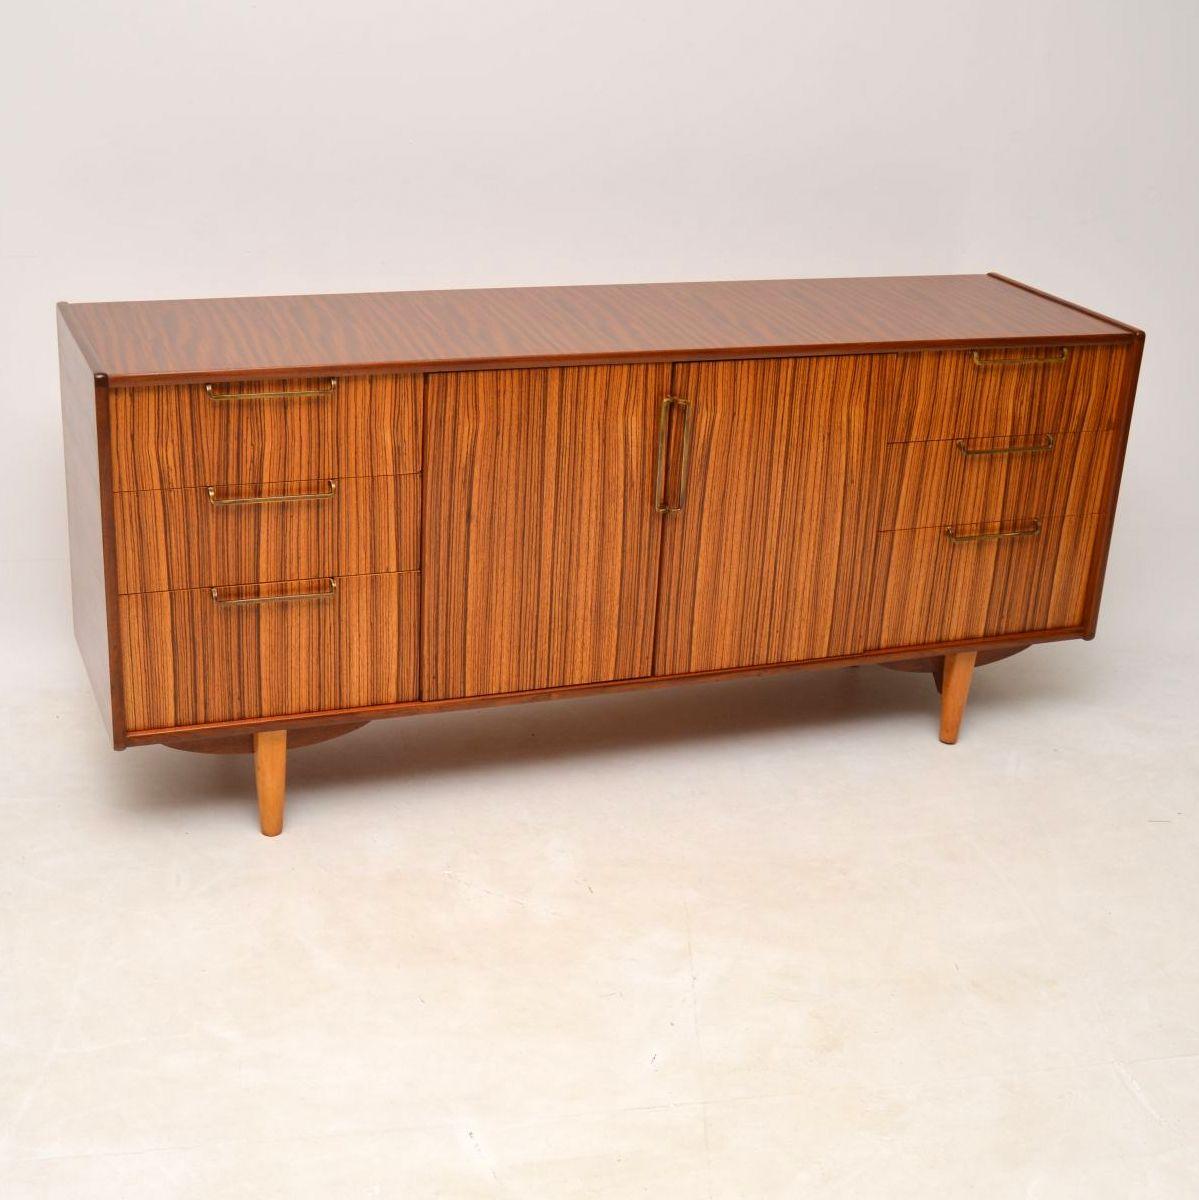 A stylish and unusual design, this vintage sideboard was made by Elliots of Newbury, it dates from the 1960s. The drawer and door fronts are made from beautifully grained zebrano, with brass handles, the top and sides are walnut. We have had this